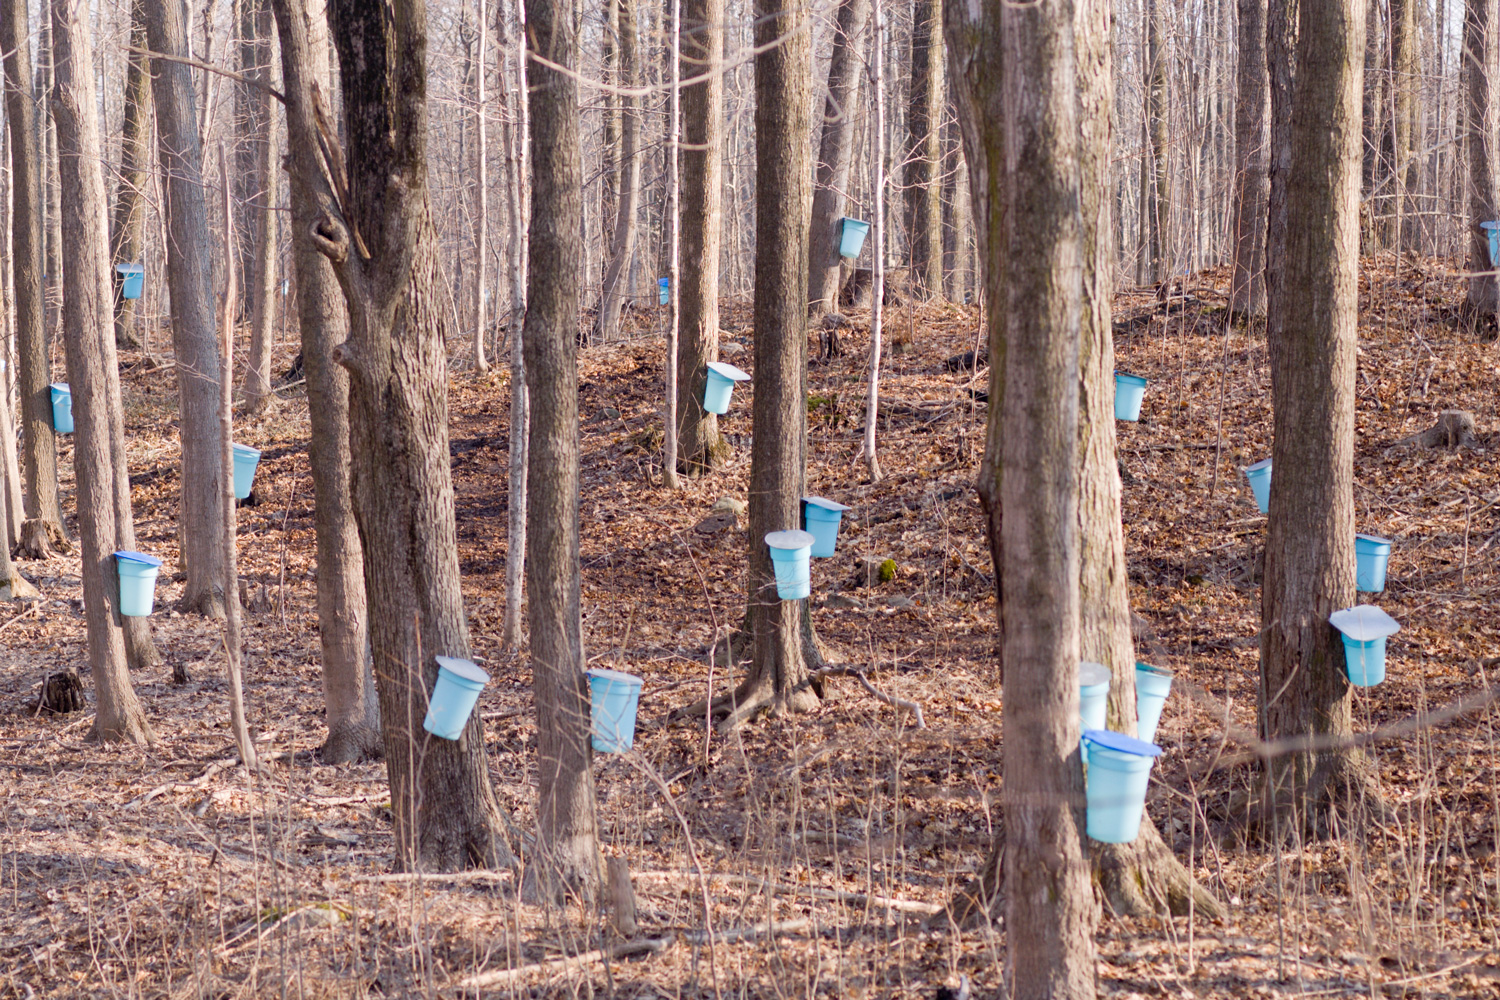 Collecting sap from Maple trees used to make Maple Syrup, Maple Sap Harvest